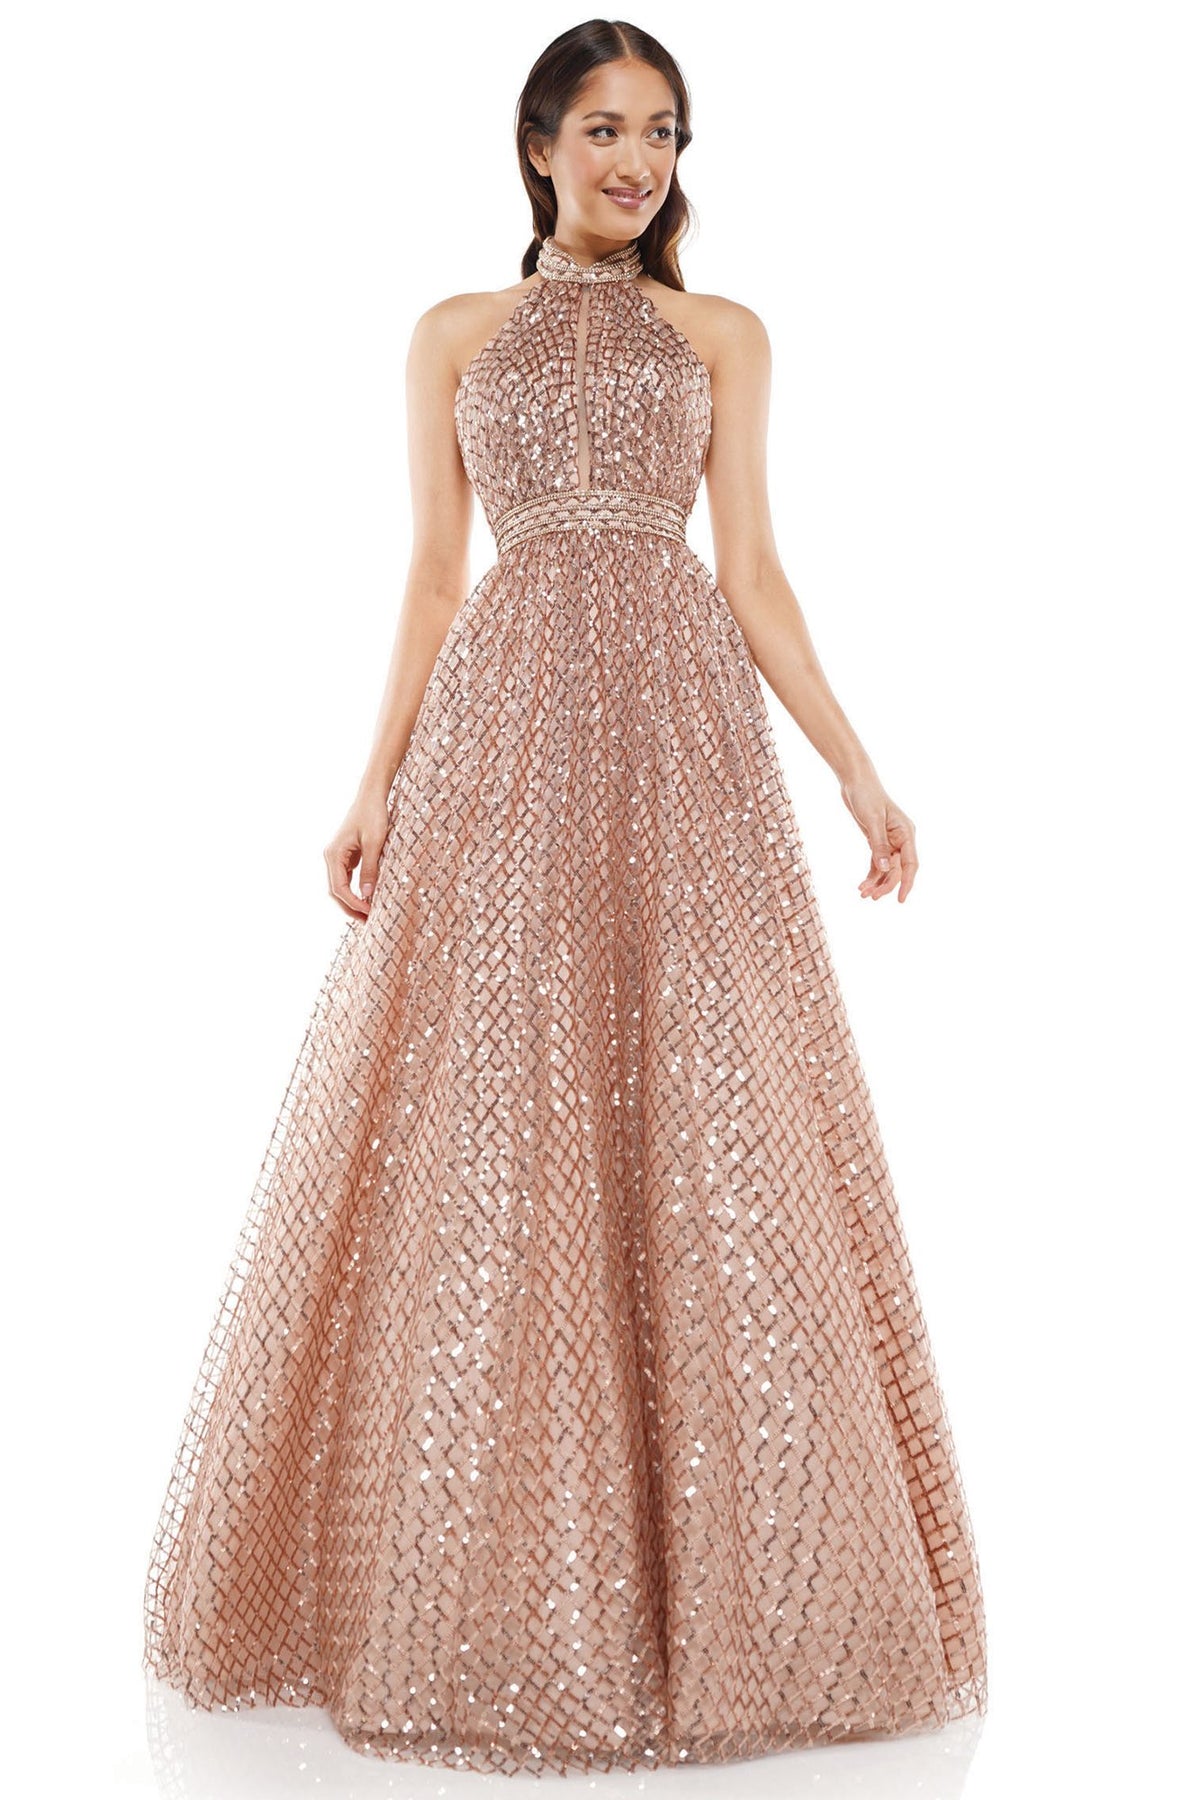 Glow Dress - G916 High Halter Sequined Lattice A-Line Gown In Pink and Gold